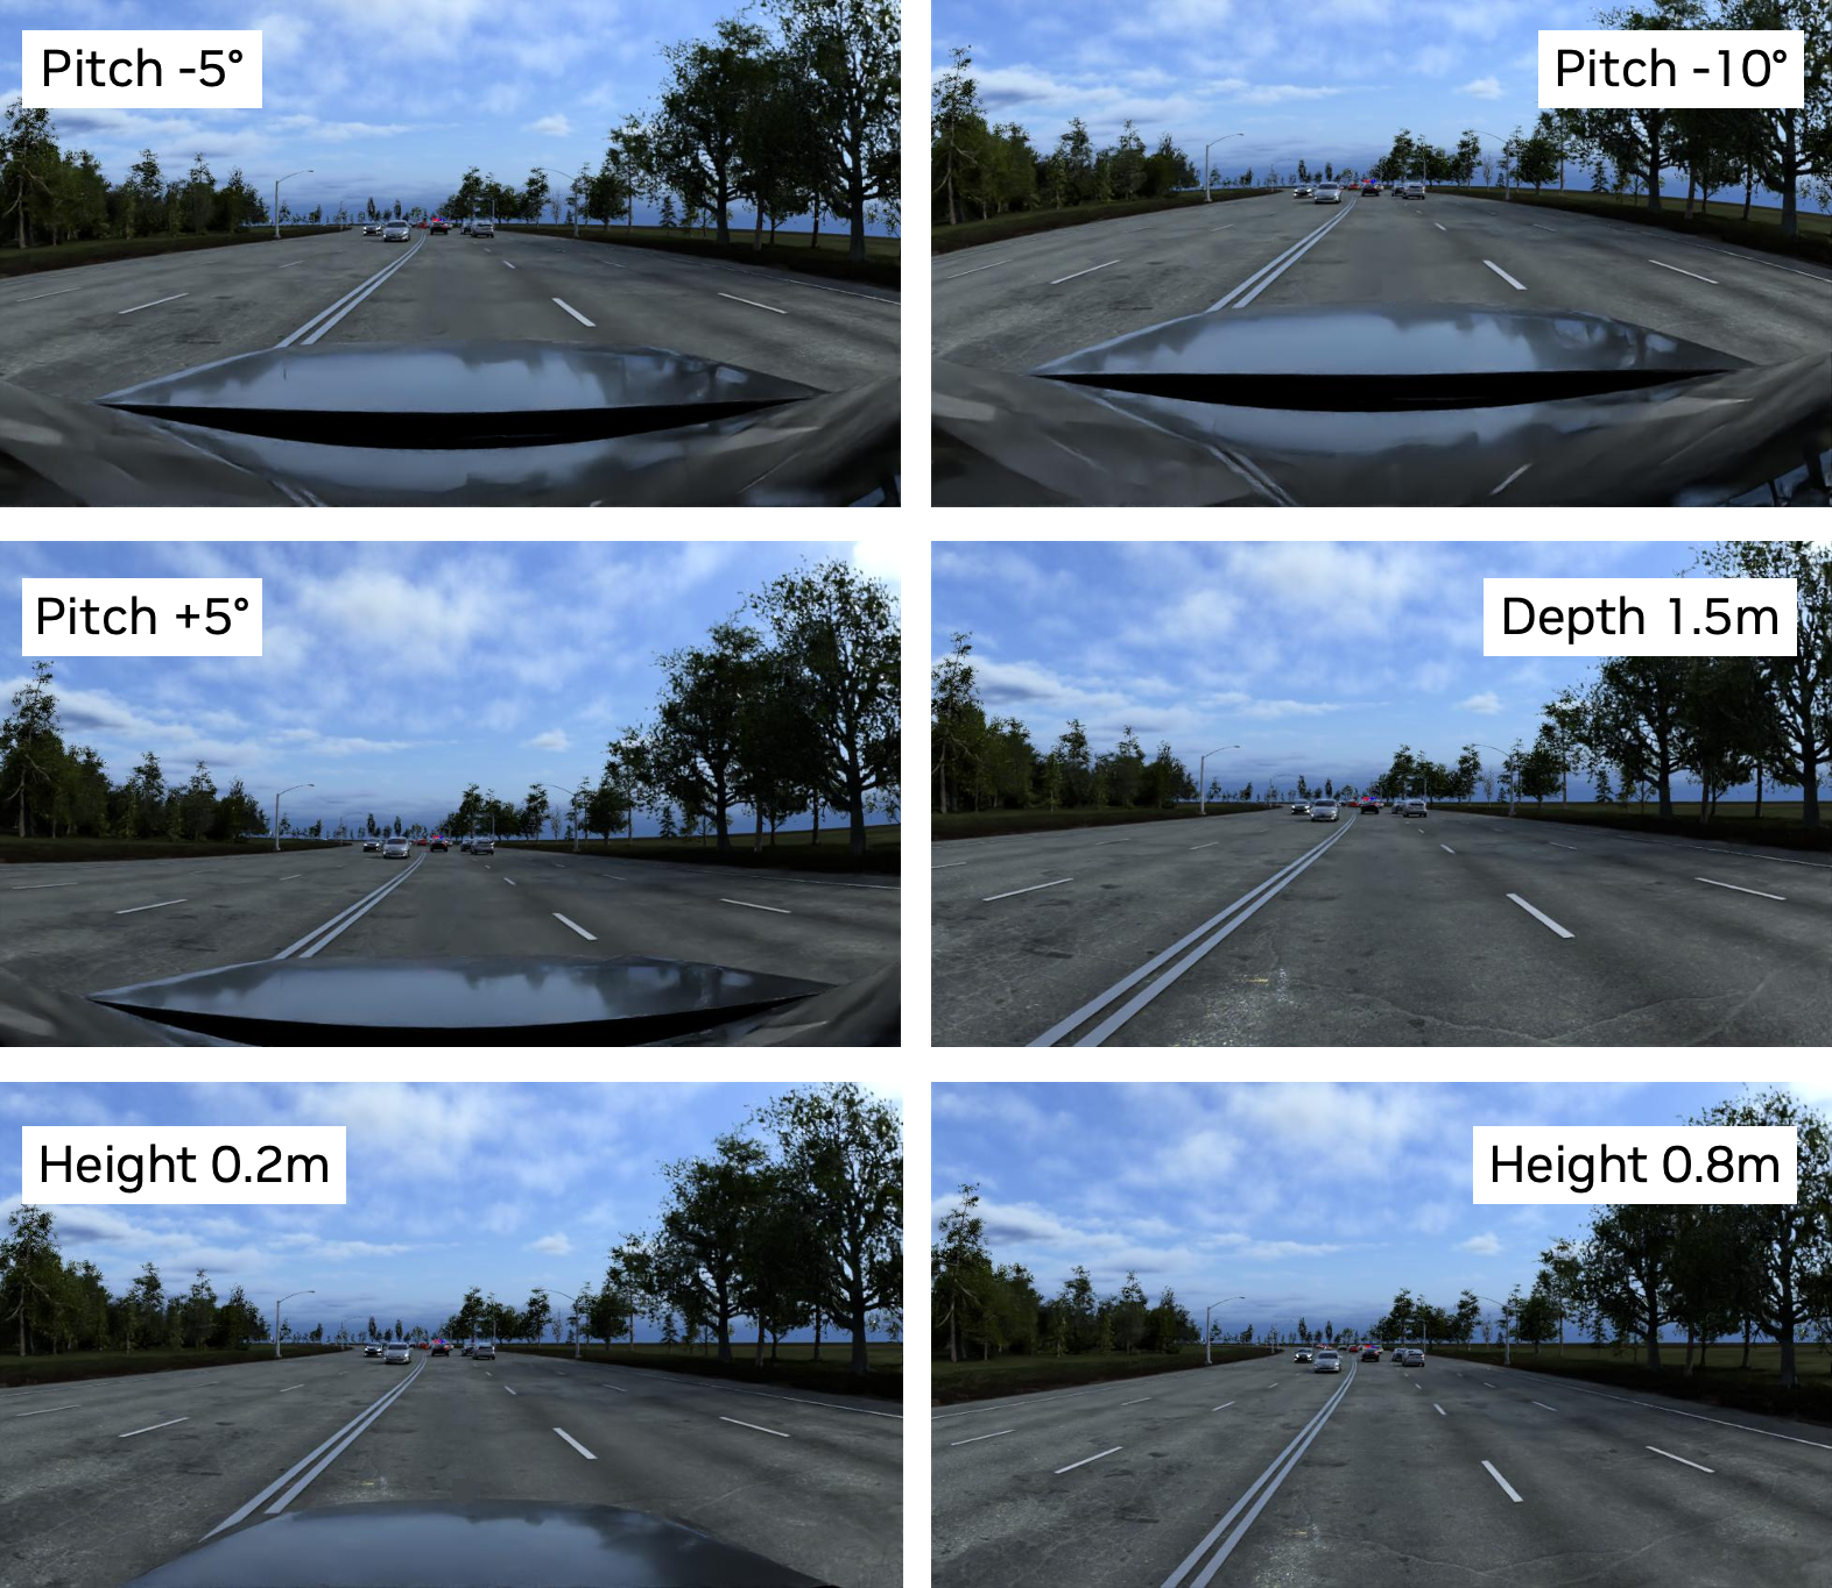 A grid of camera images from a vehicle’s point of view, each showing slight adjustments in camera pitch, depth, and height.